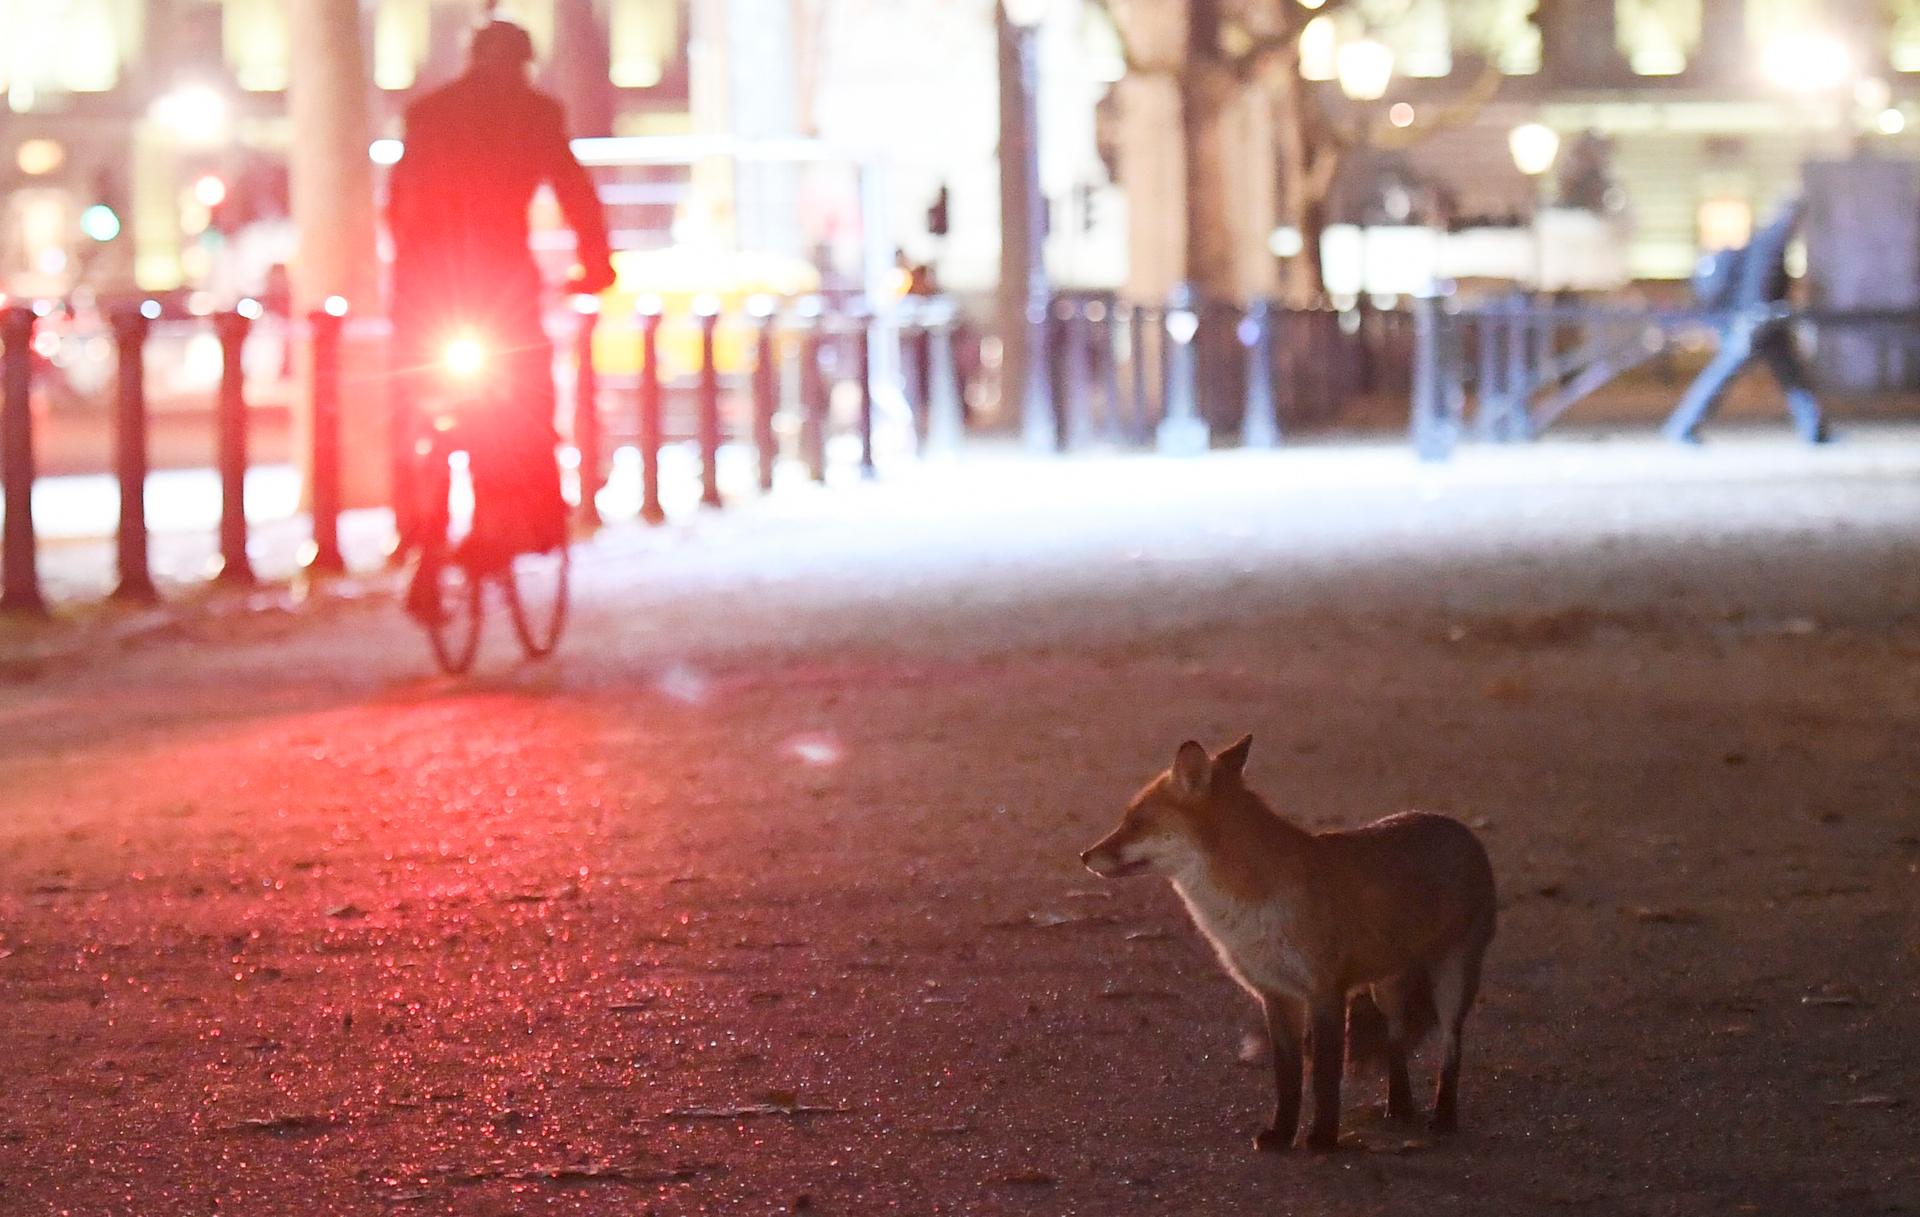 London is home to thousands of urban foxes